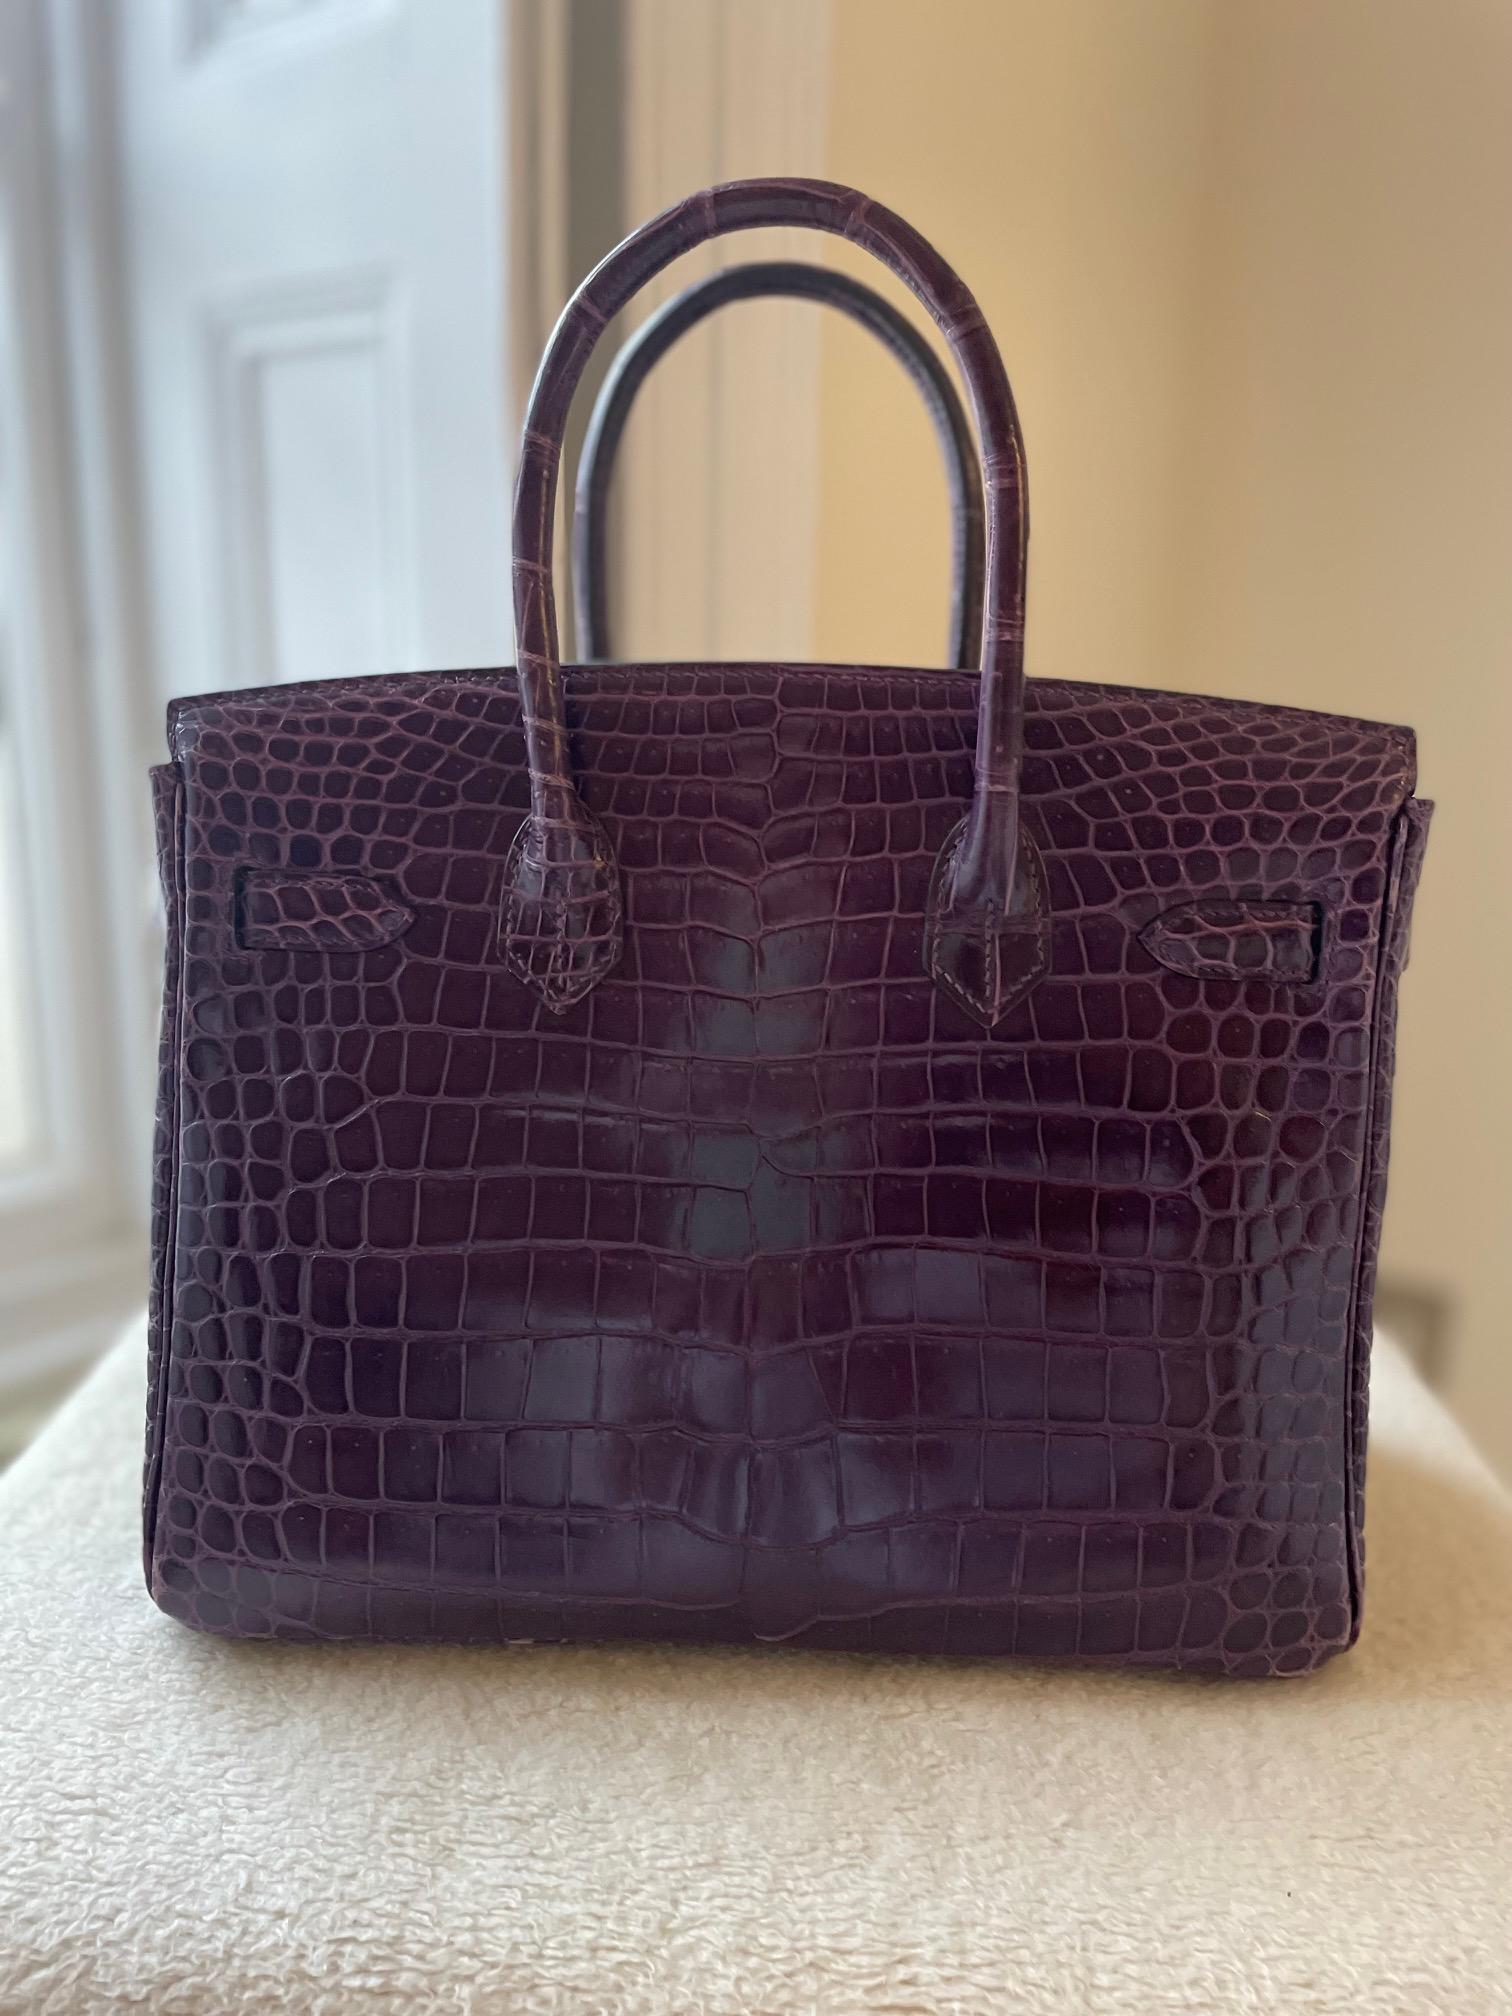 Hermes Birkin 30  In Excellent Condition For Sale In London, England